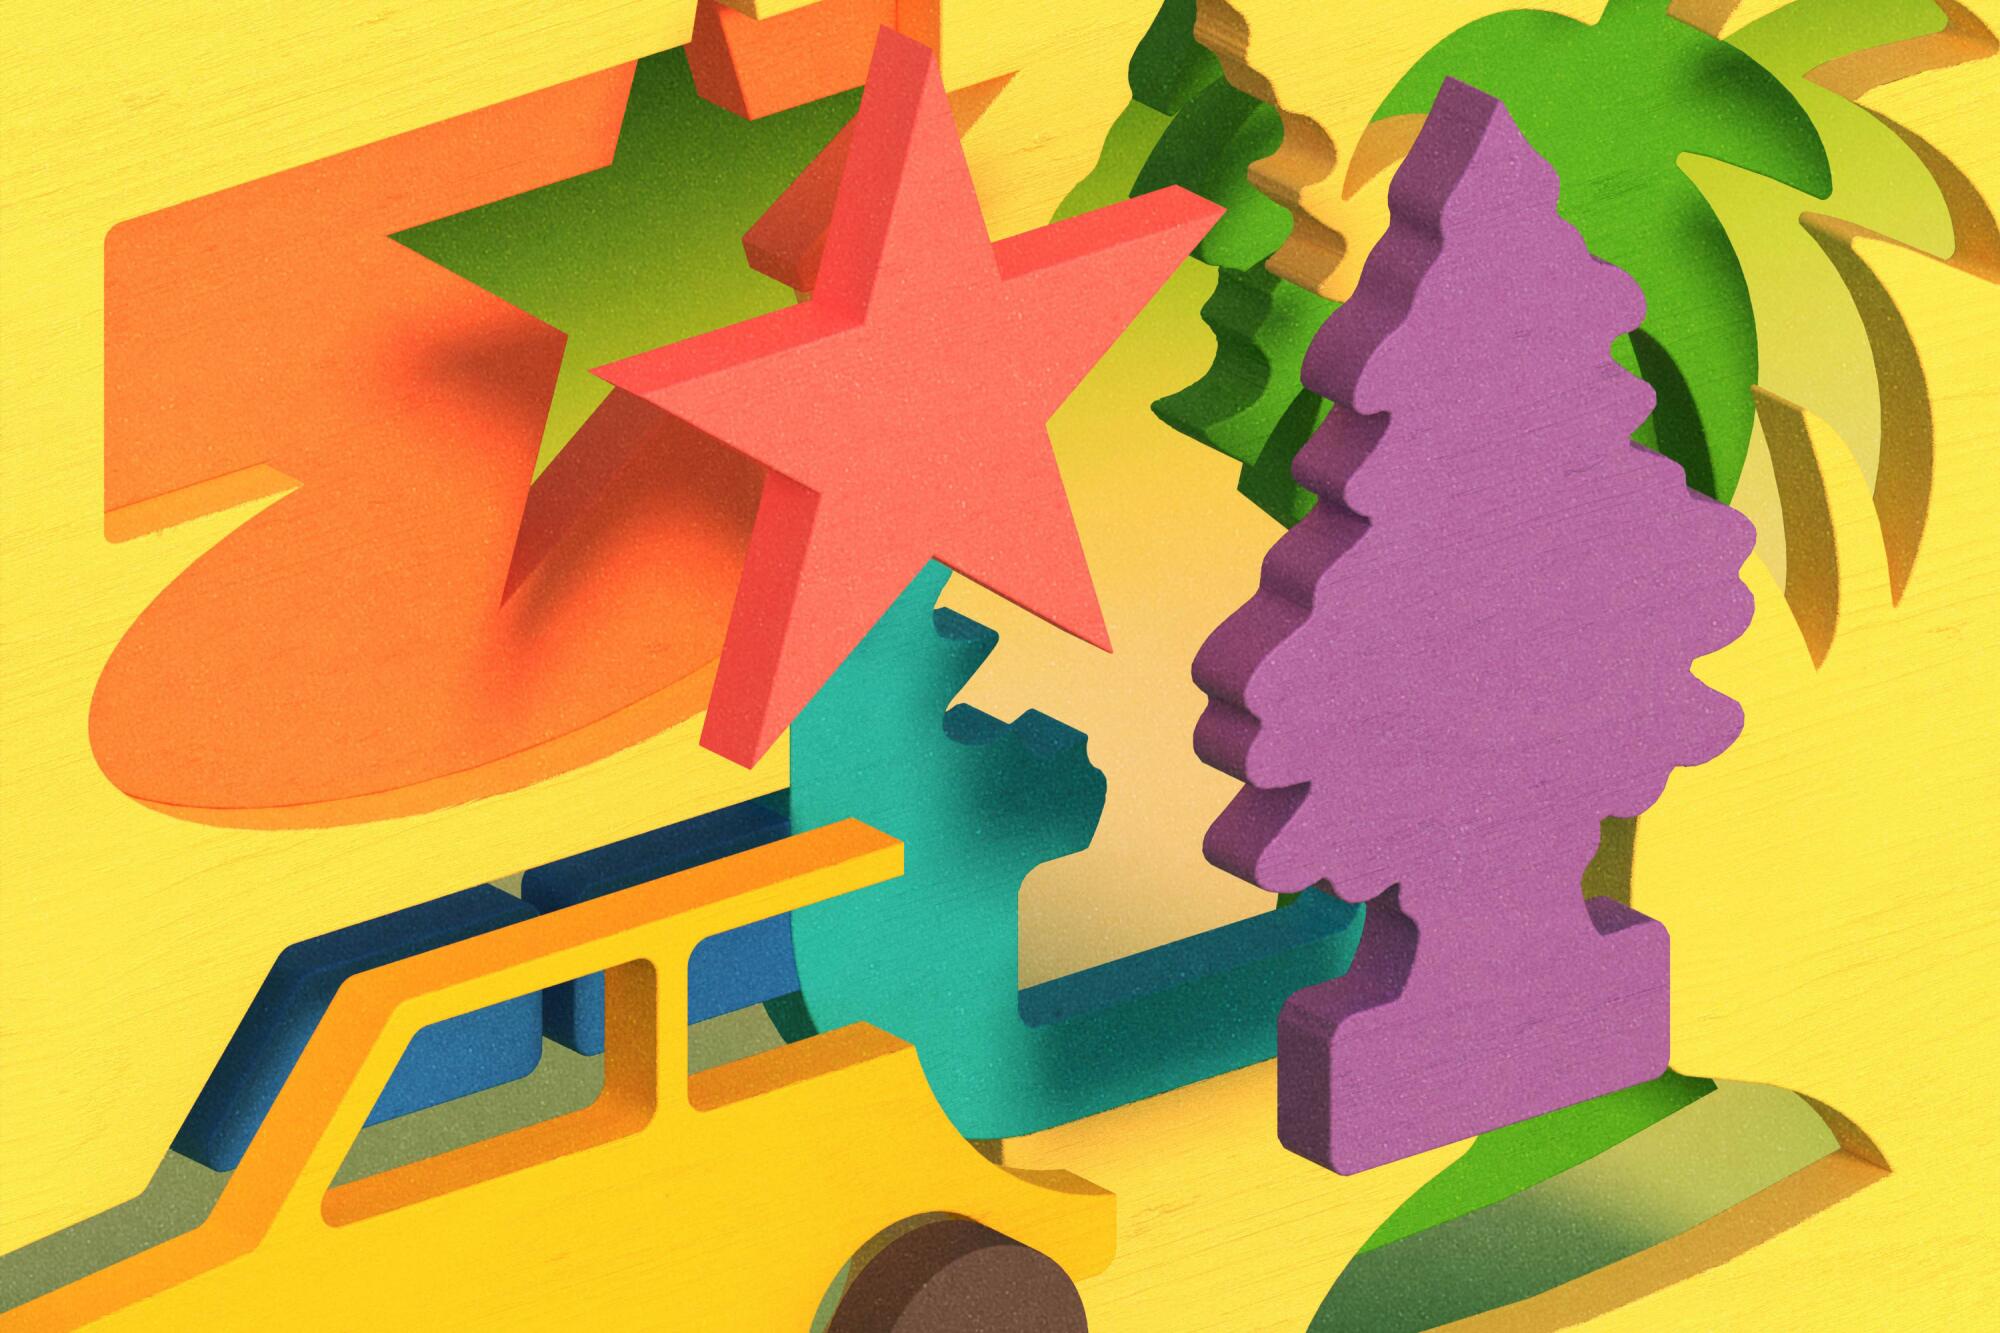 A colorful puzzle with shapes including a star, a car, a tree-shaped car freshener, and a palm tree